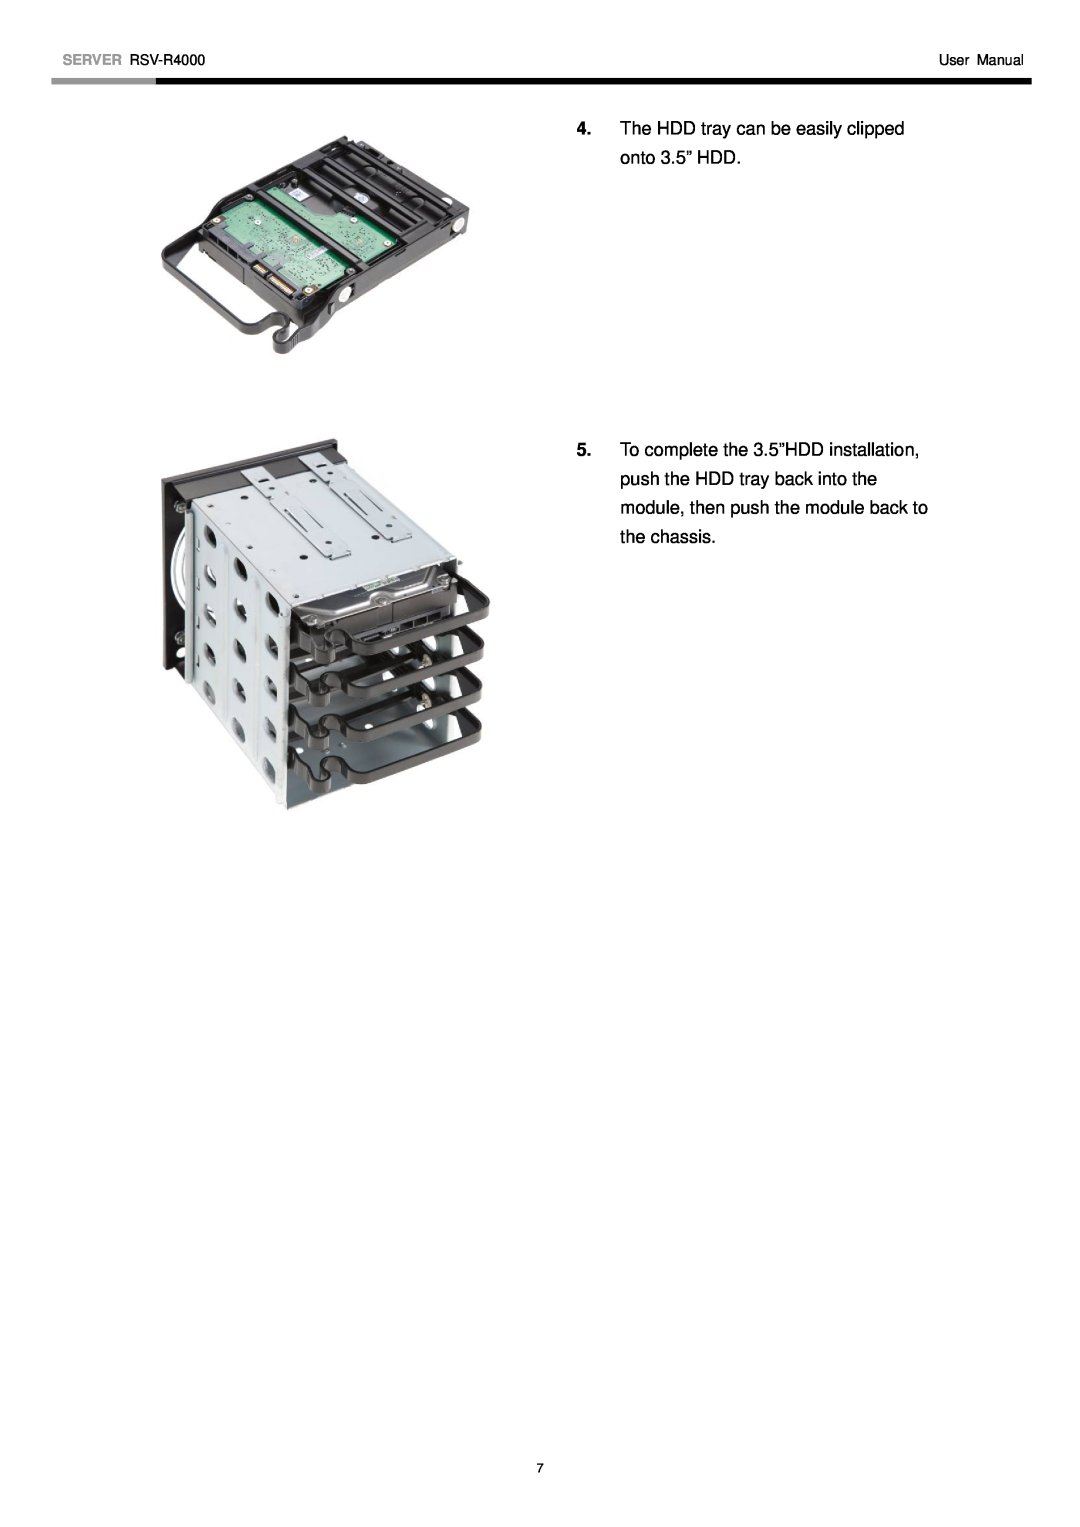 Rosewill user manual The HDD tray can be easily clipped onto 3.5” HDD, SERVER RSV-R4000, User Manual 